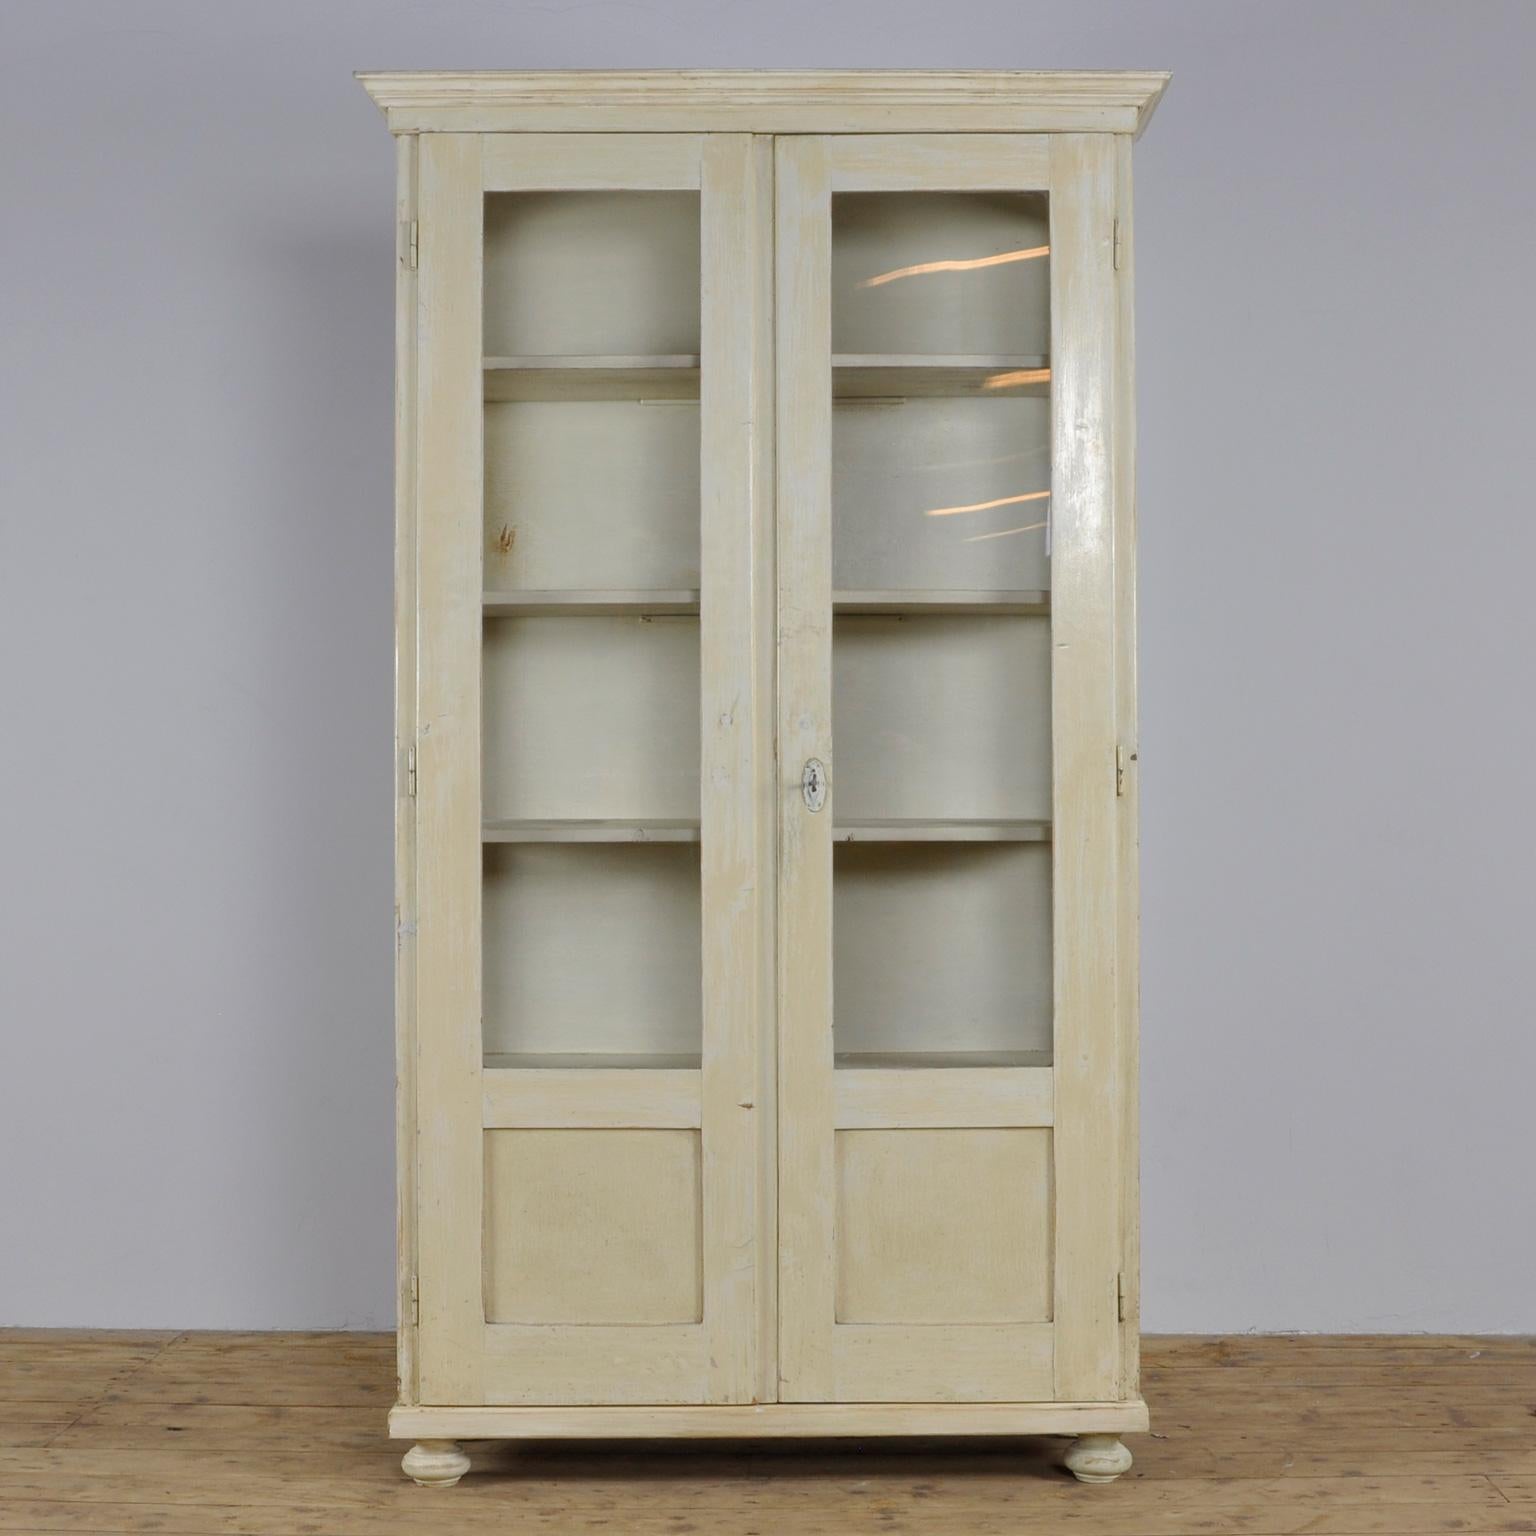 This Eastern European cabinet retains its original paint and pine interior. It features four shelves.